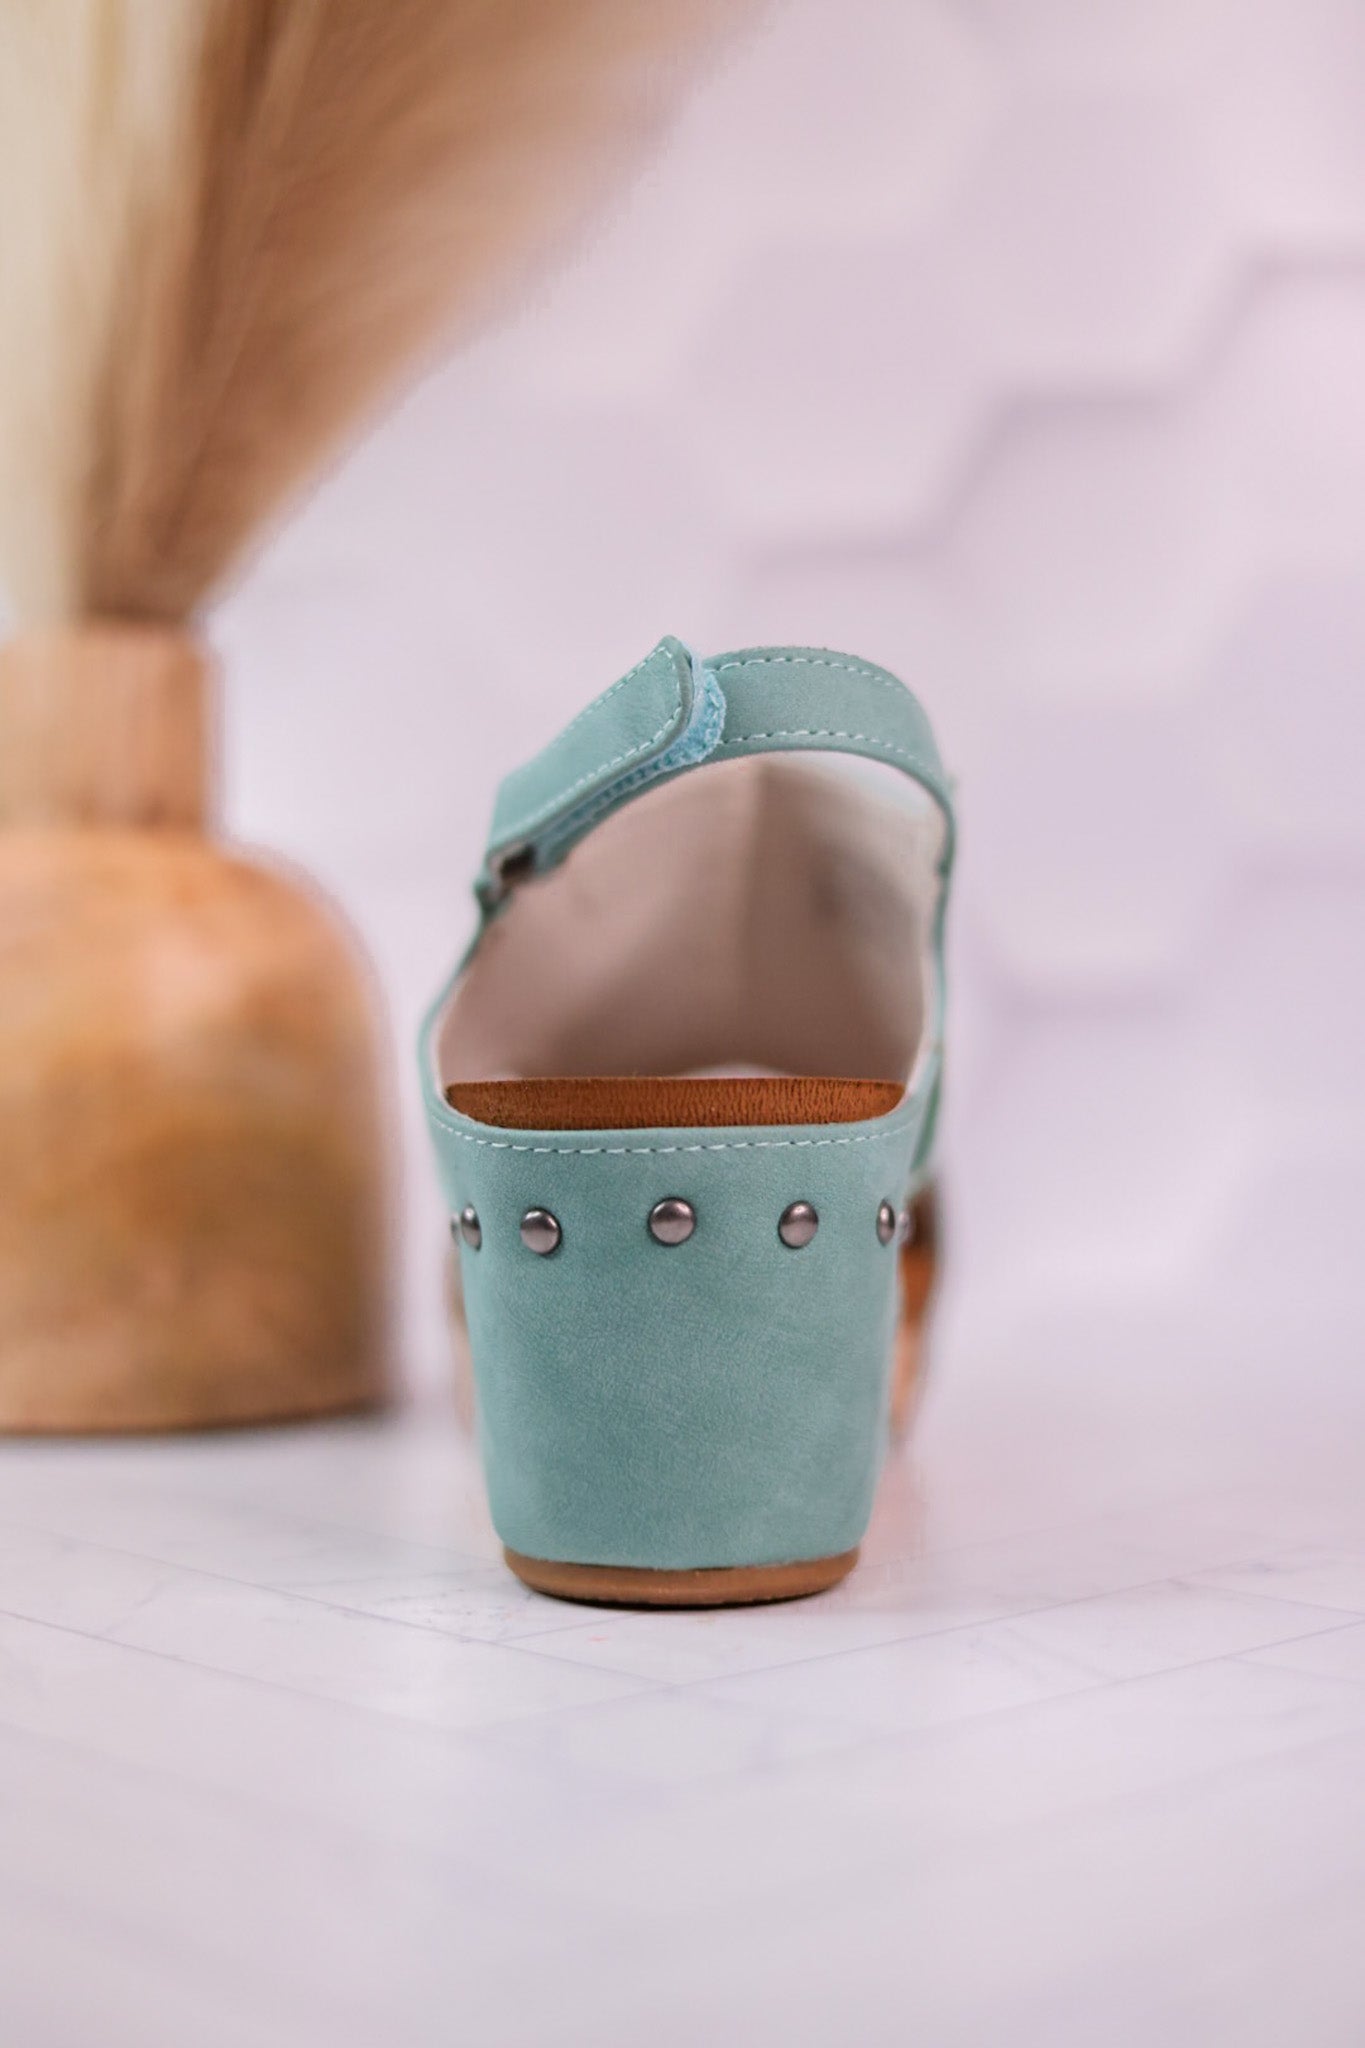 Isabella Turquoise Wedge Sandals